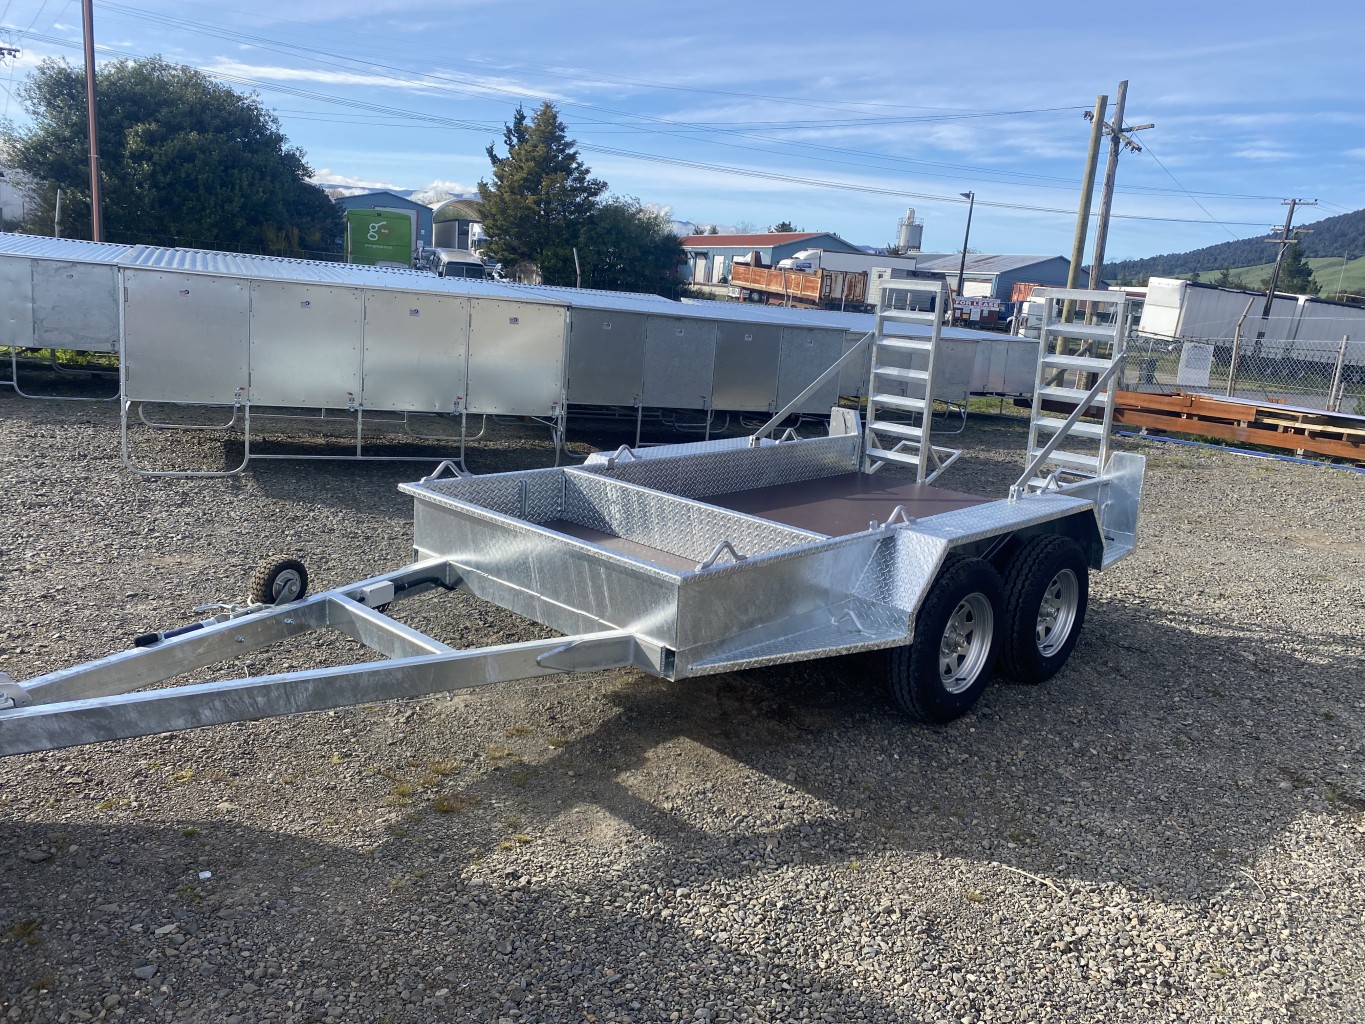 Example of a tandem trailer , fully galvanized and built to last